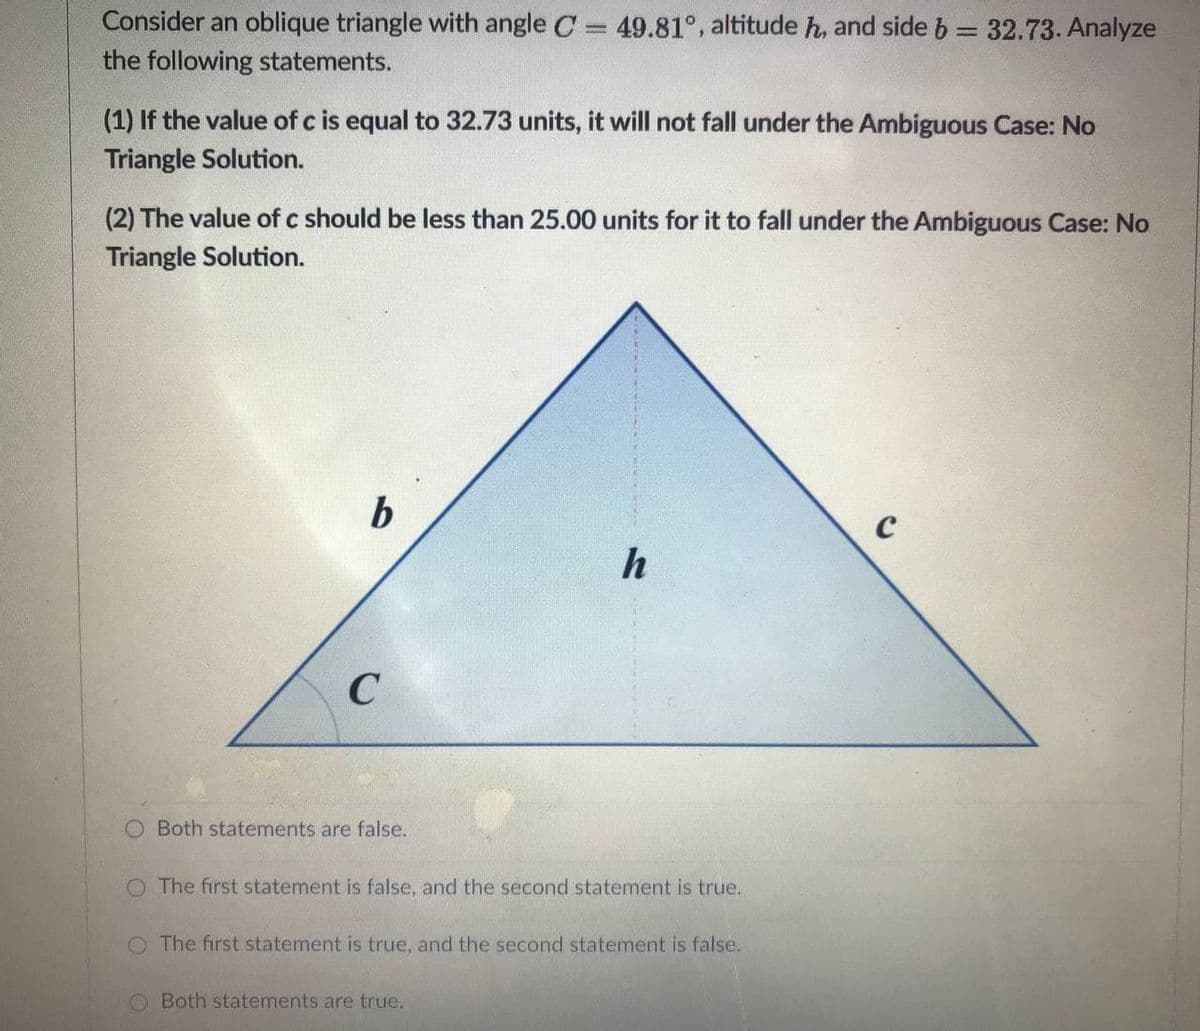 Consider an oblique triangle with angle C 49.81°, altitude h, and side b = 32.73. Analyze
the following statements.
(1) If the value of c is equal to 32.73 units, it will not fall under the Ambiguous Case: No
Triangle Solution.
(2) The value of c should be less than 25.00 units for it to fall under the Ambiguous Case: No
Triangle Solution.
b
h
Both statements are false.
O The first statement is false, and the second statement is true.
The first statement is true, and the second statement is false.
Both statements are true.
